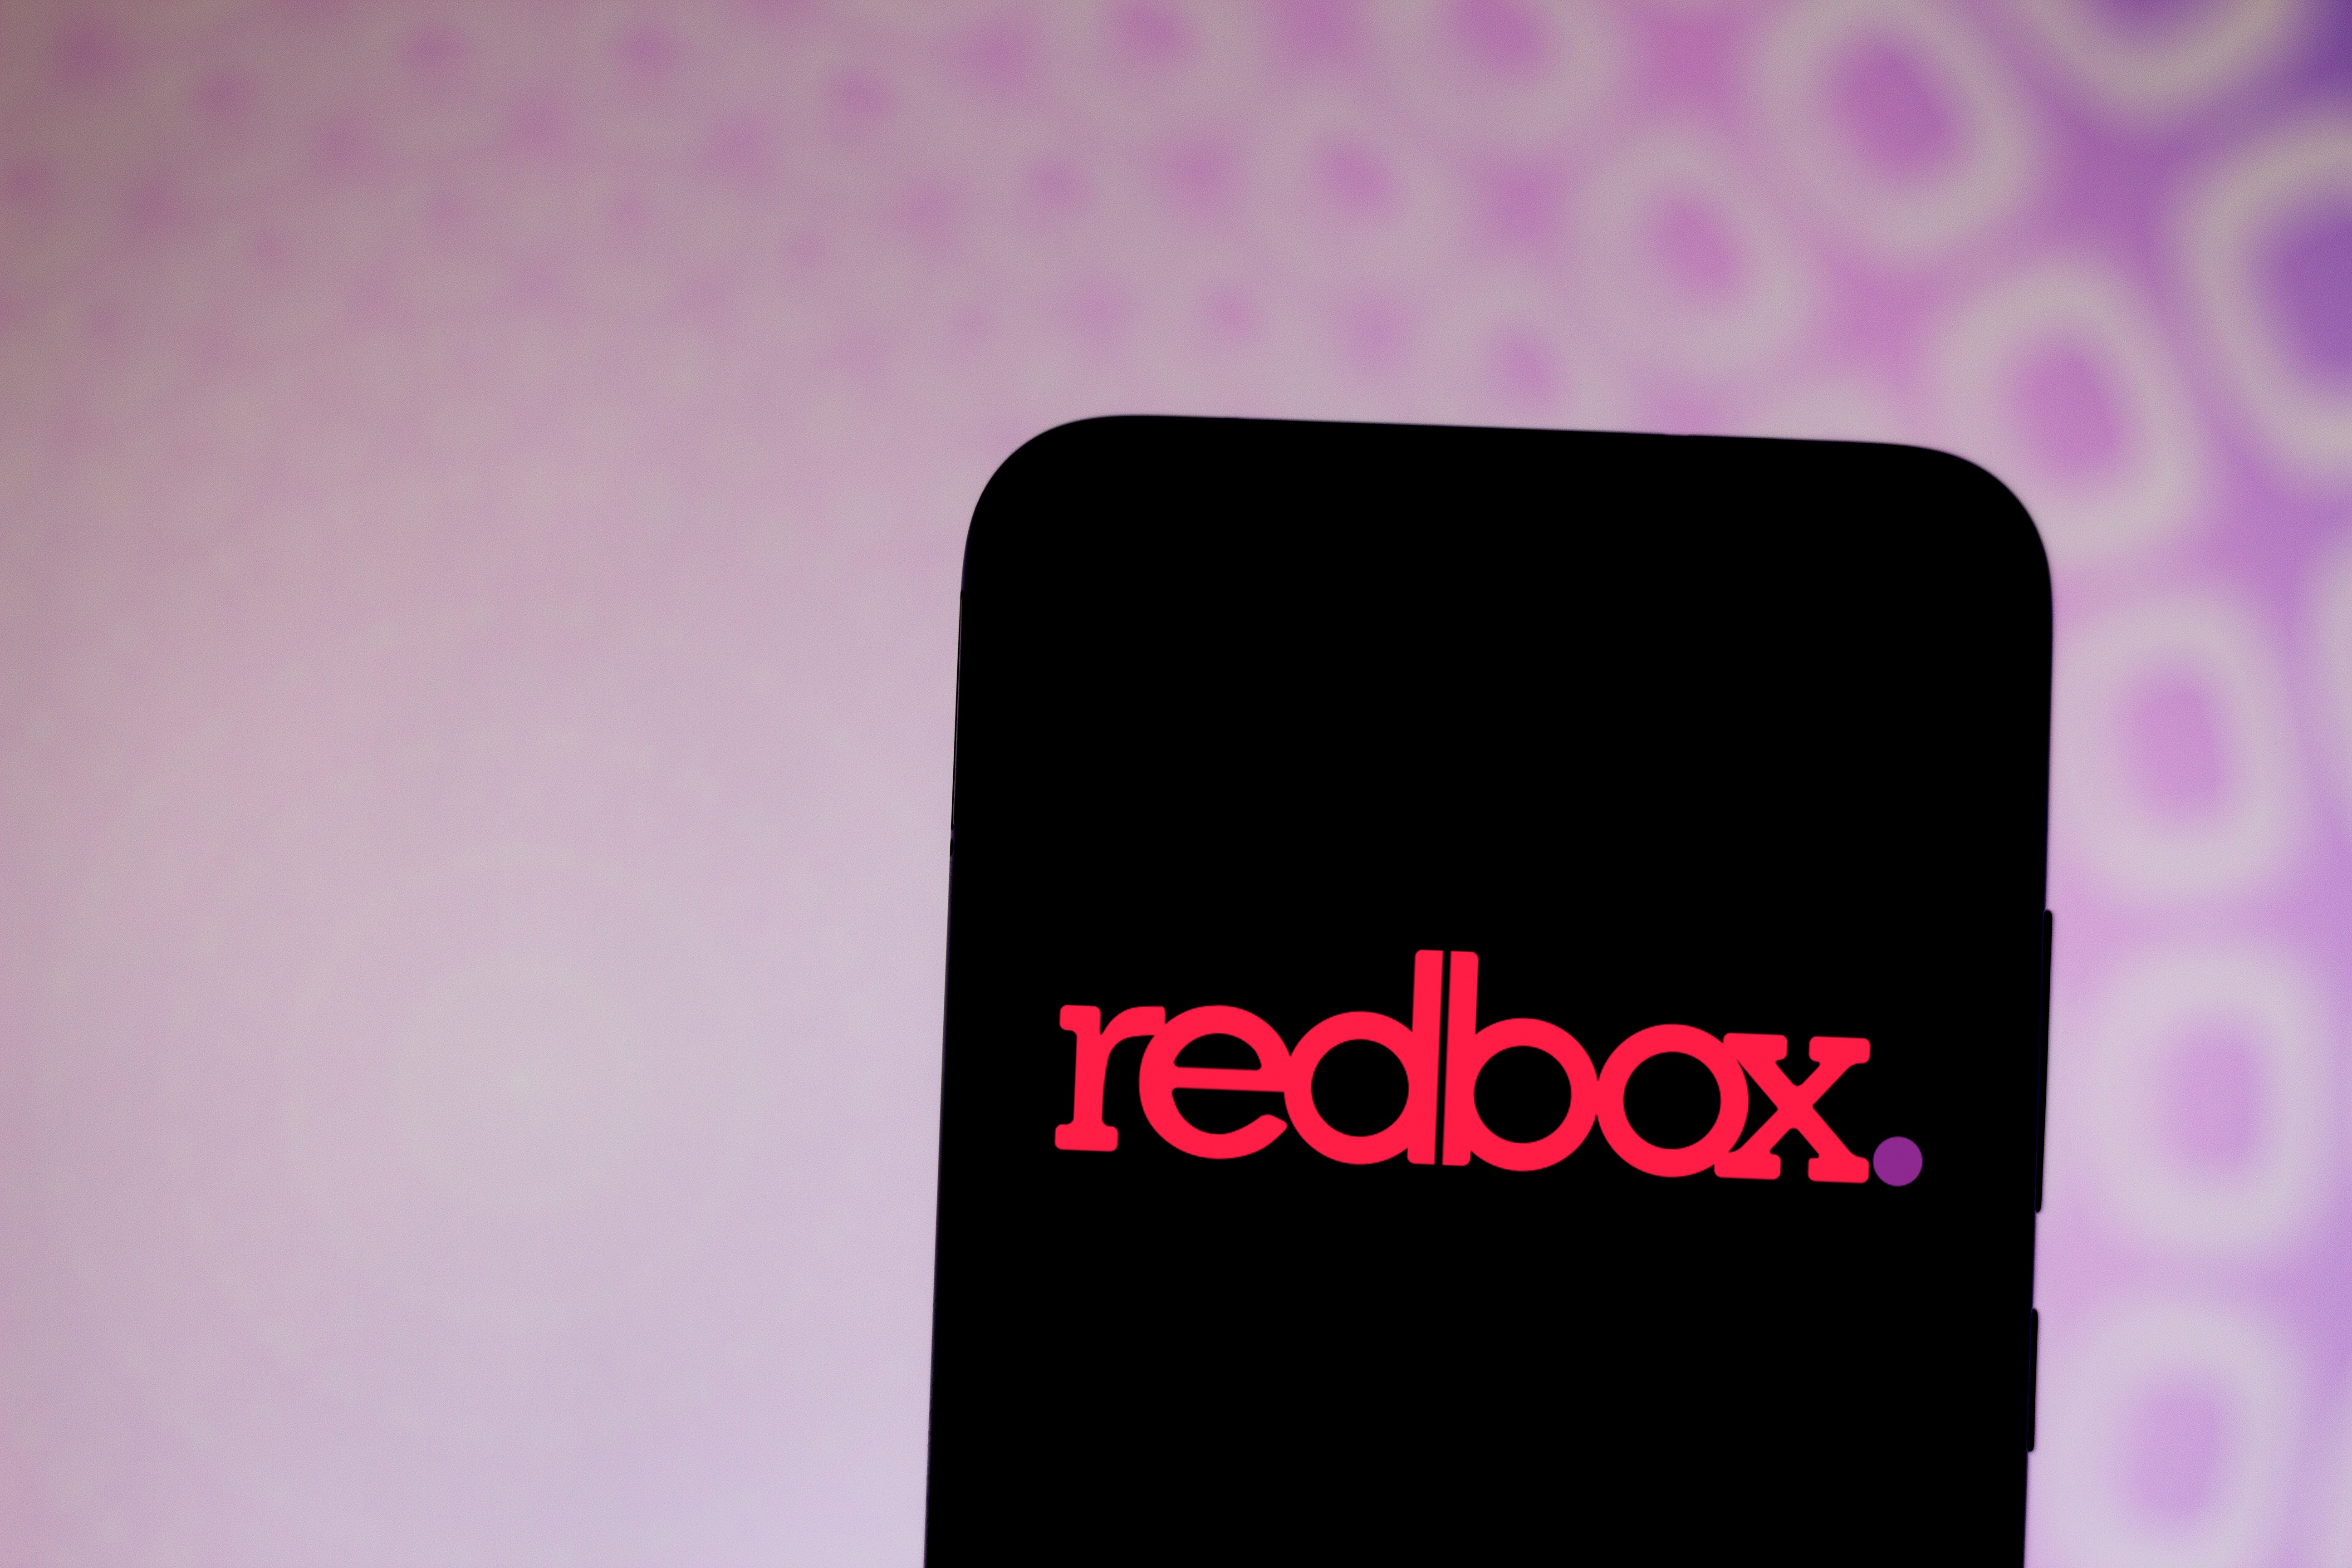 Redbox Partners with Lionsgate, Will Release 36 Original Movies Per Year